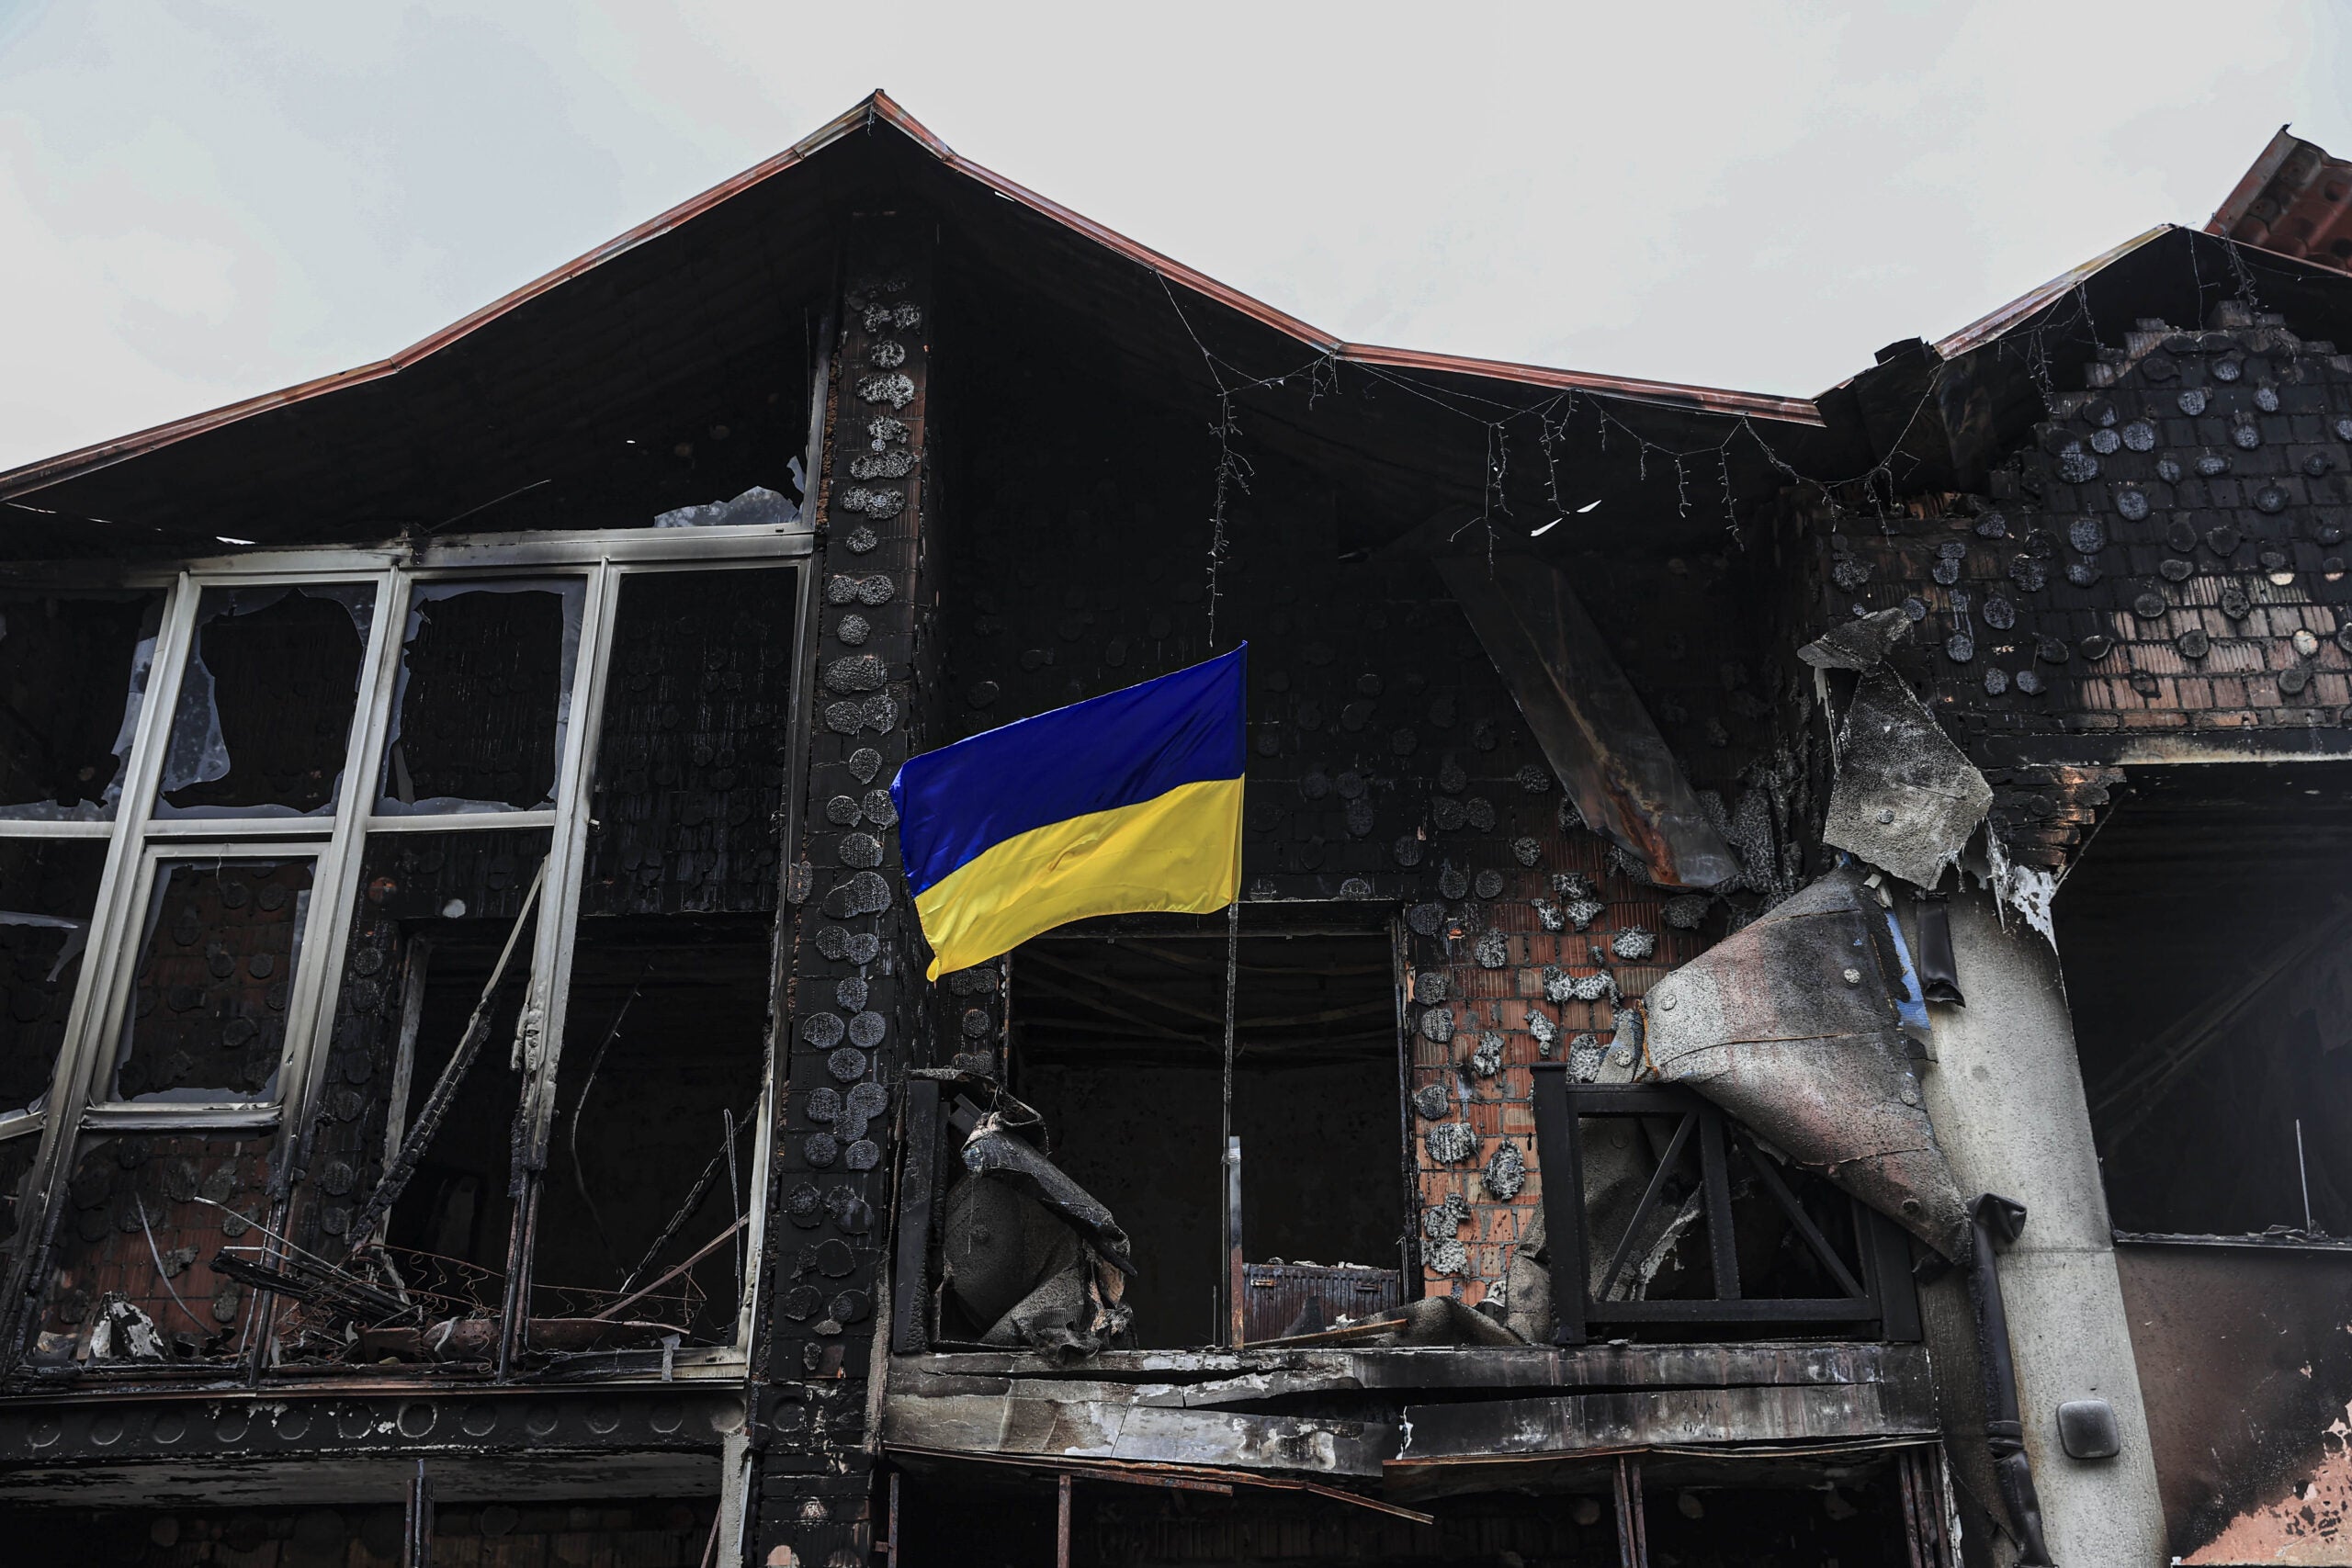 IRPIN, UKRAINE - JUNE 21: A view of devastation after conflicts as Ukrainians trying to rebound back to life Irpin near Kyiv, Ukraine on June 21, 2022. The city was one of the main hotspots of fighting with Russian troops before Ukrainian forces pulled back. (Photo by Metin Aktas/Anadolu Agency via Getty Images)